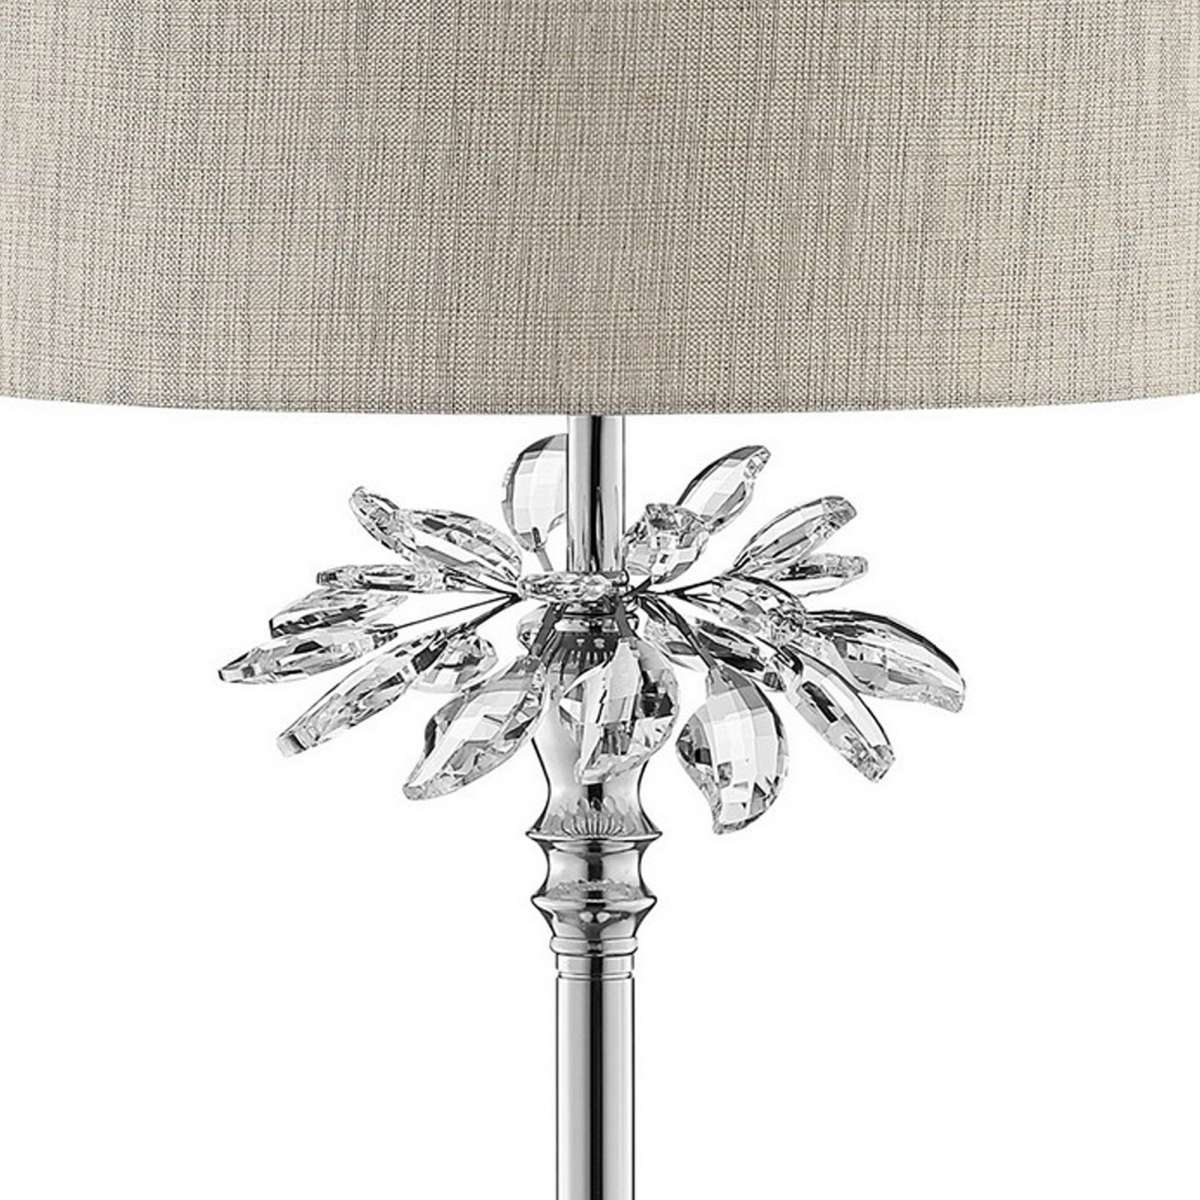 Benzara Table Lamp With Starburst Crystal Accent, Gray And Silver By Benzara Table Lamps BM240451